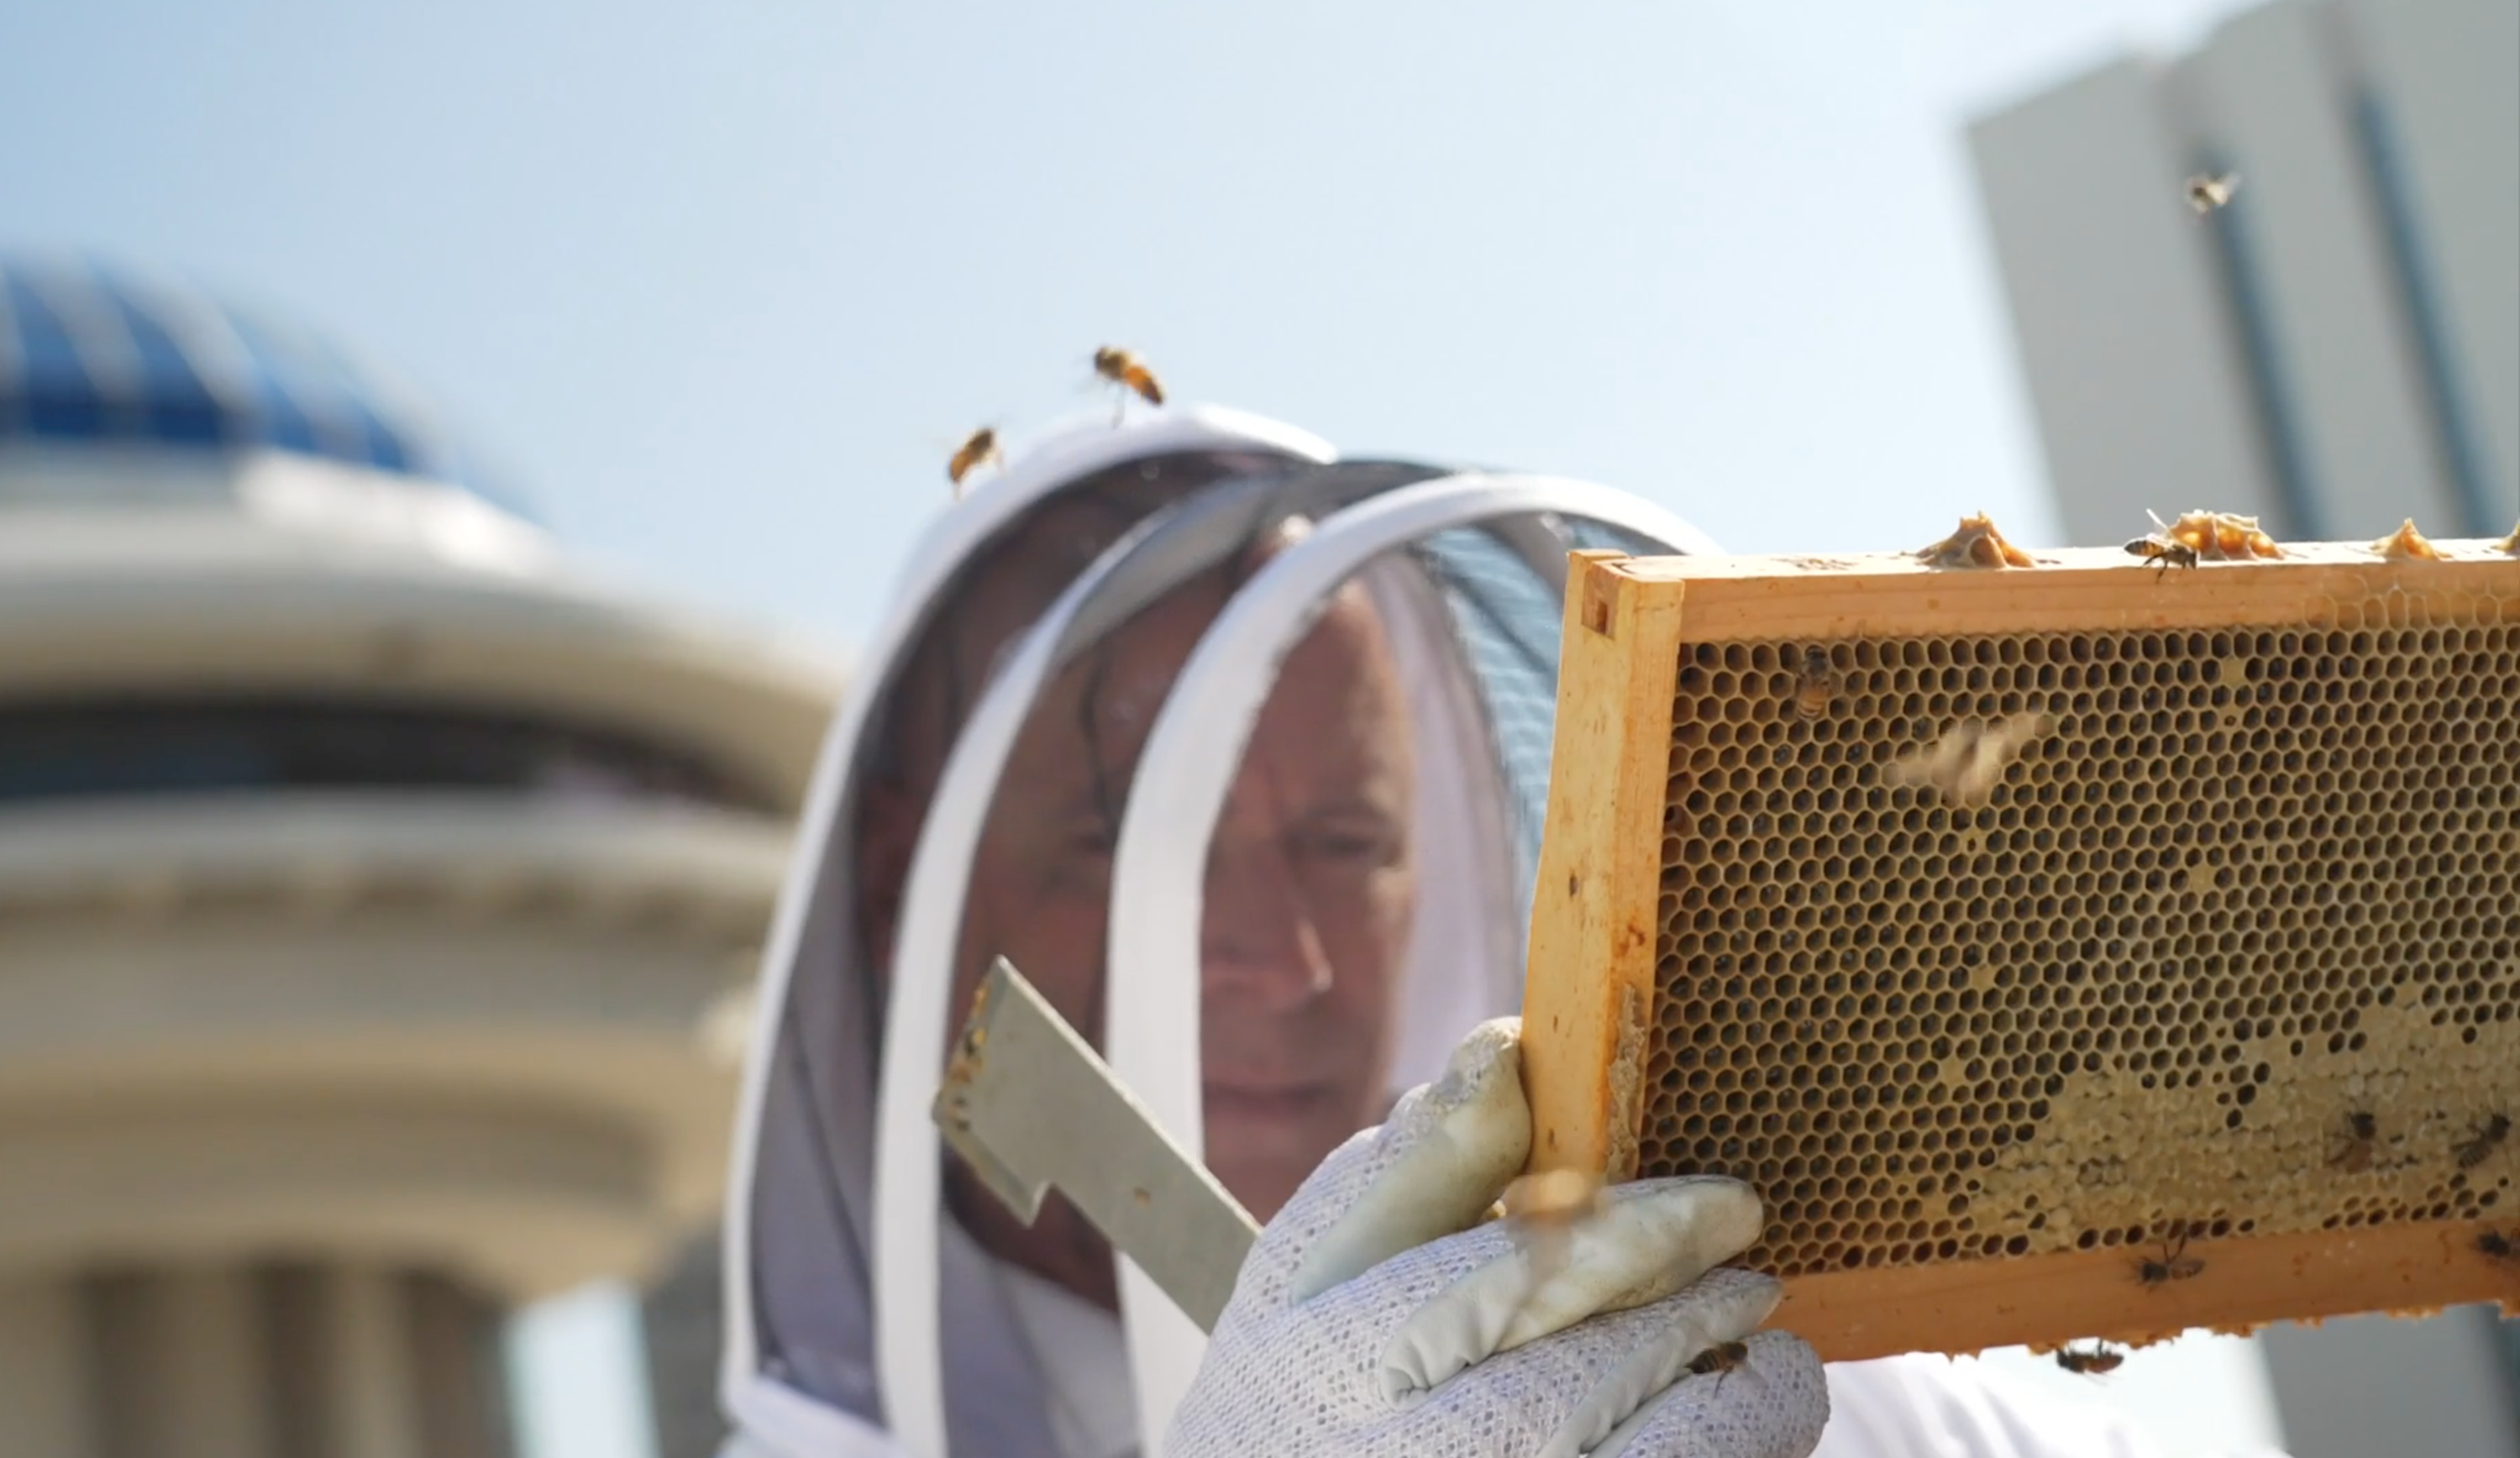 The Secret Life of Beekeepers - Country Roads Magazine